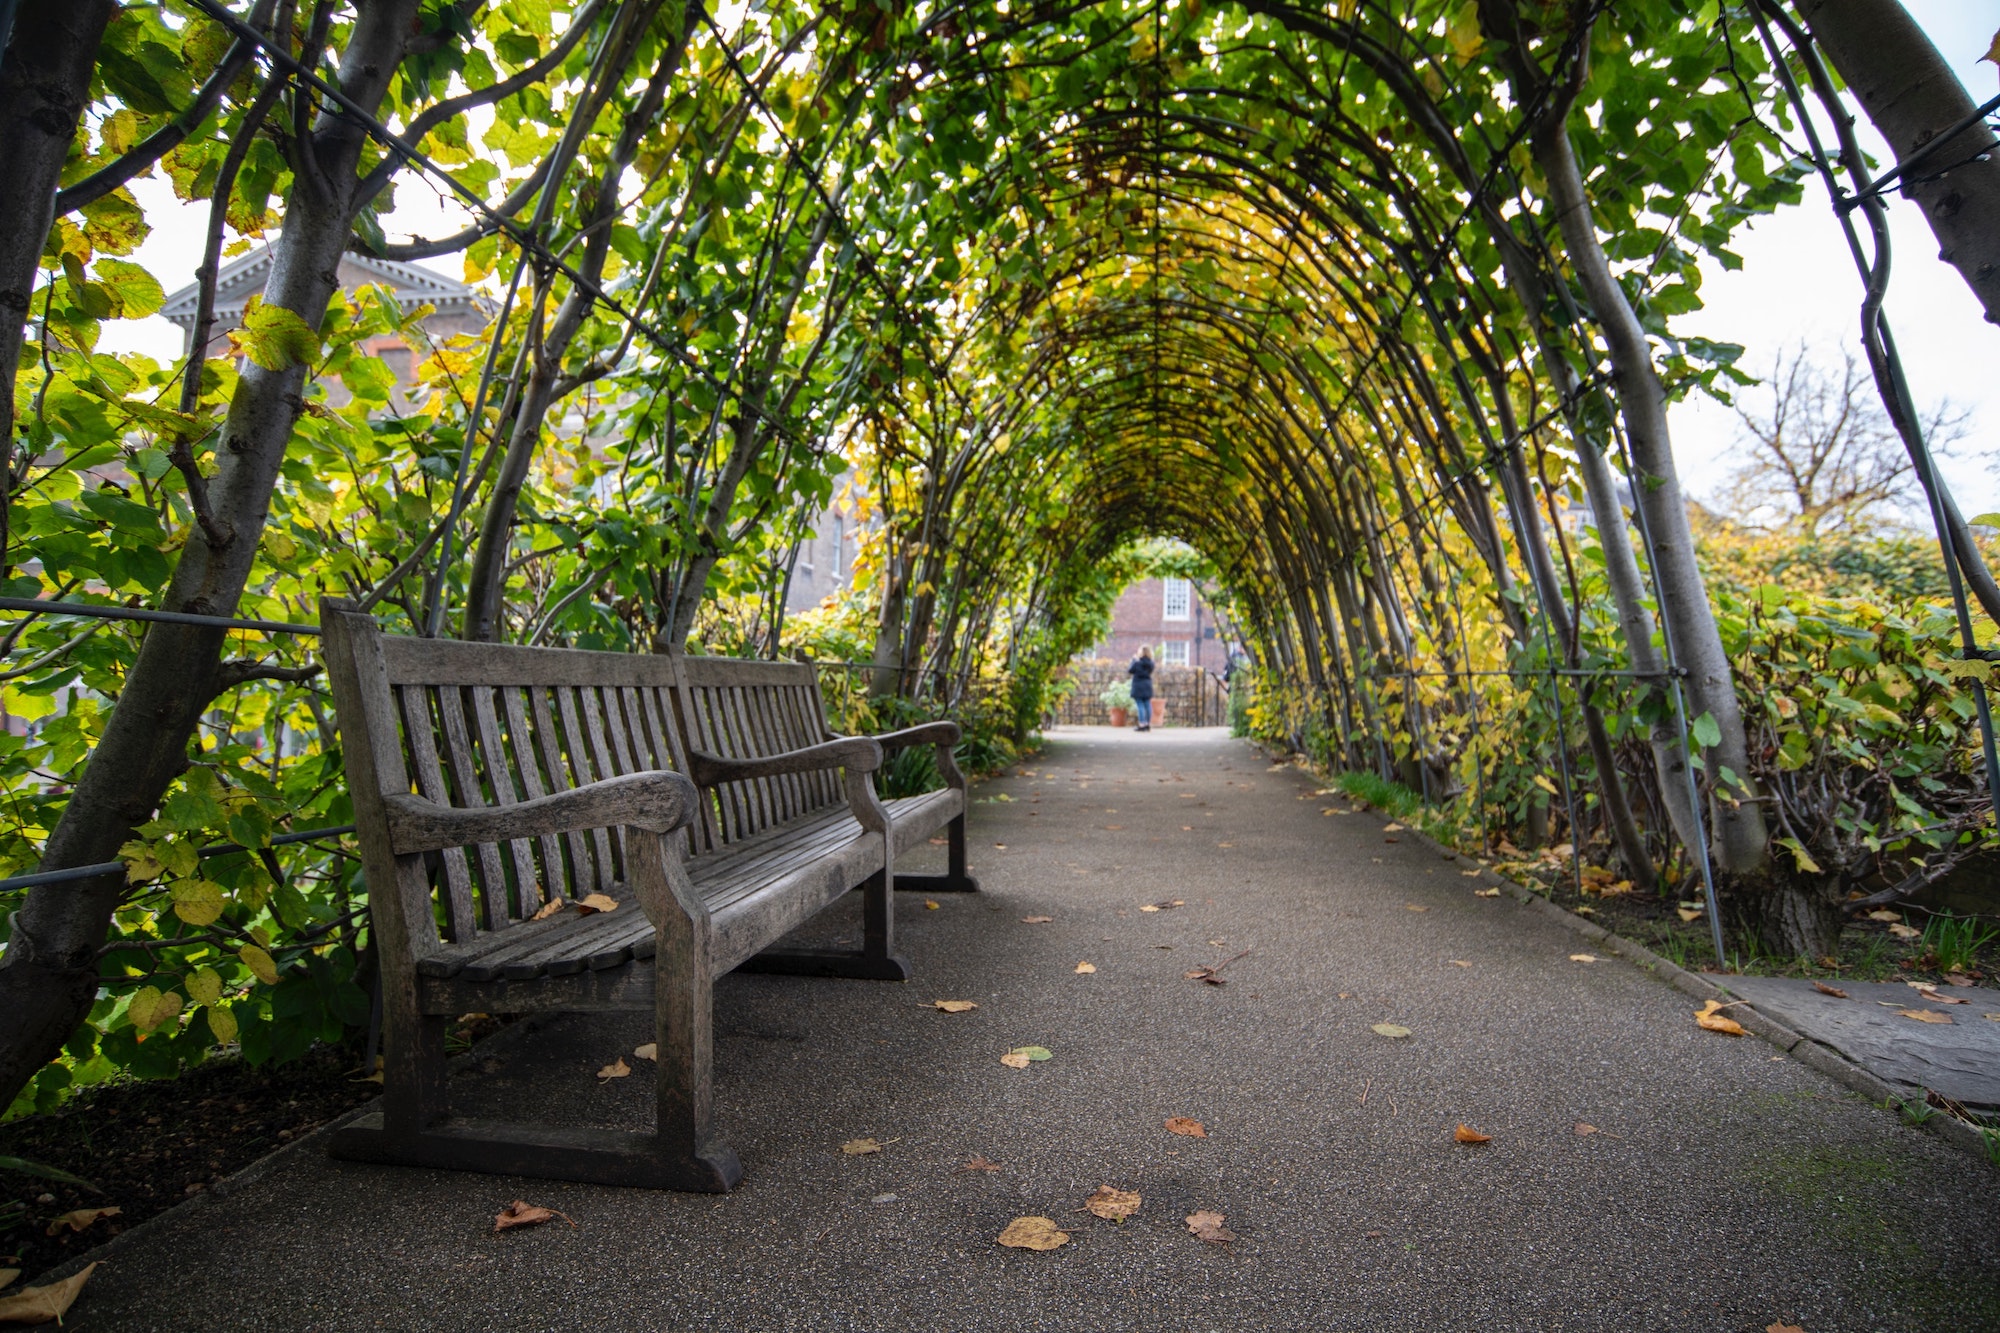 park in kensington with arch covered in plants